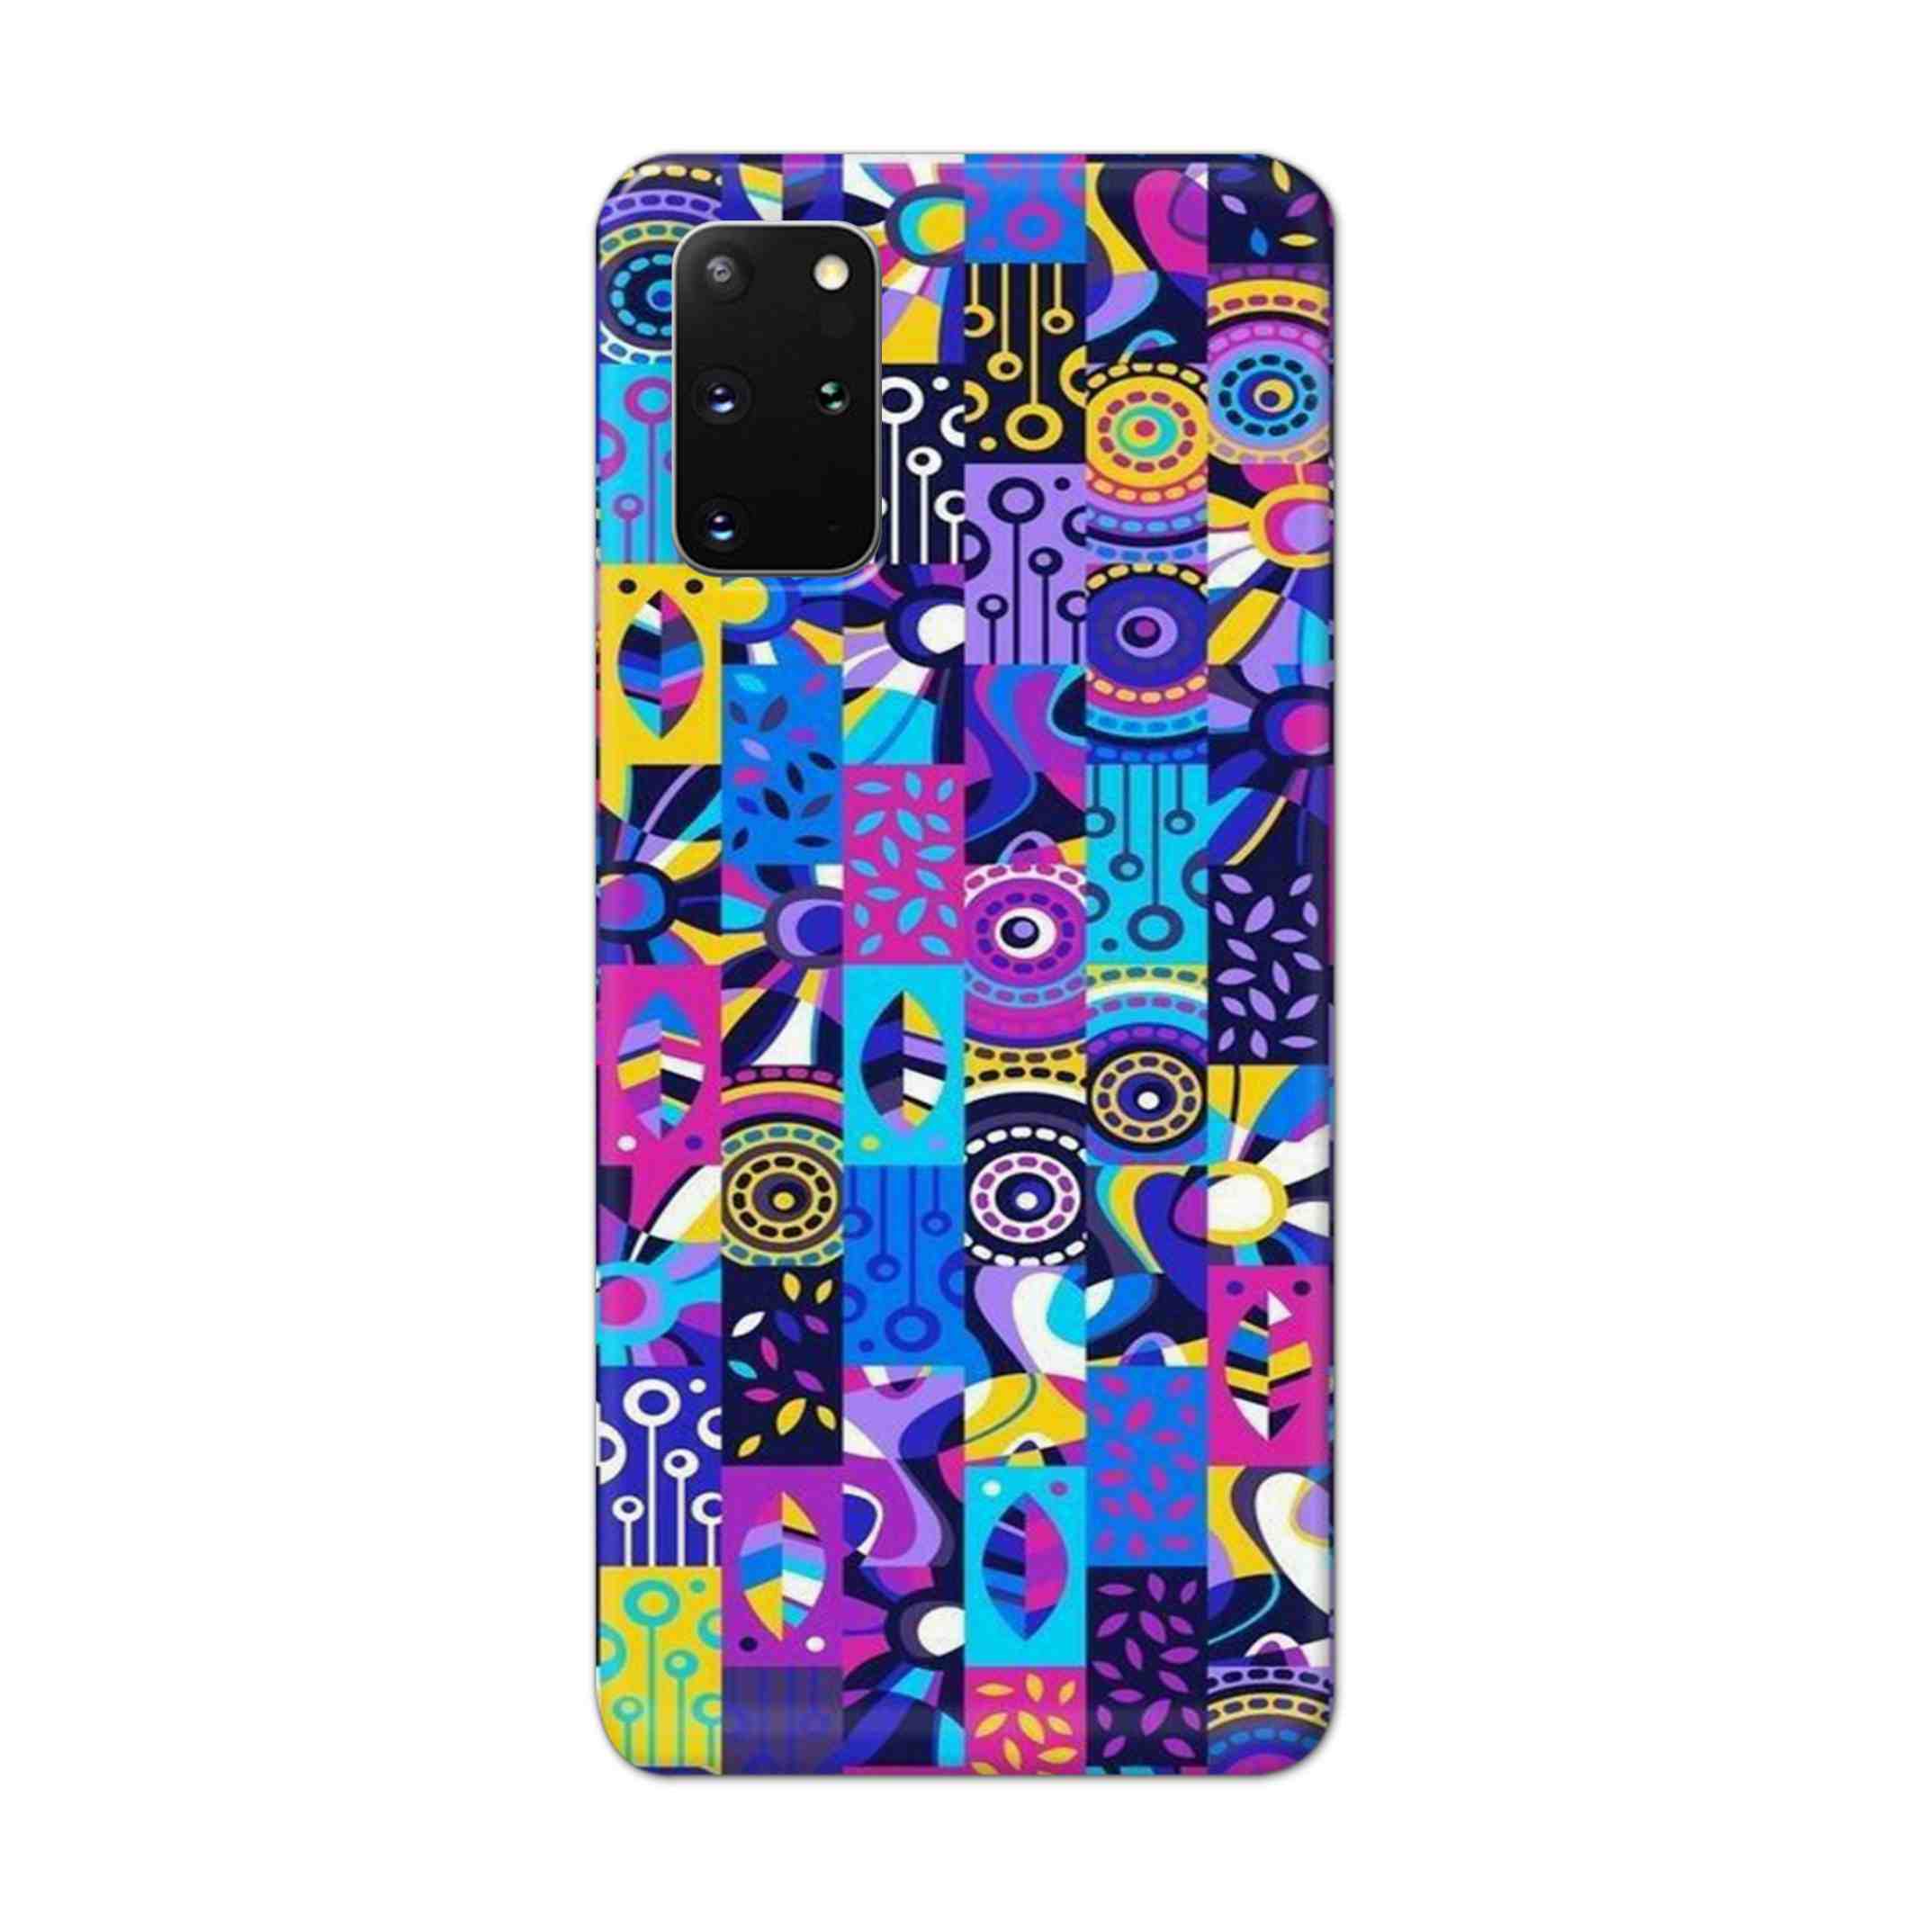 Buy Rainbow Art Hard Back Mobile Phone Case Cover For Samsung Galaxy S20 Plus Online